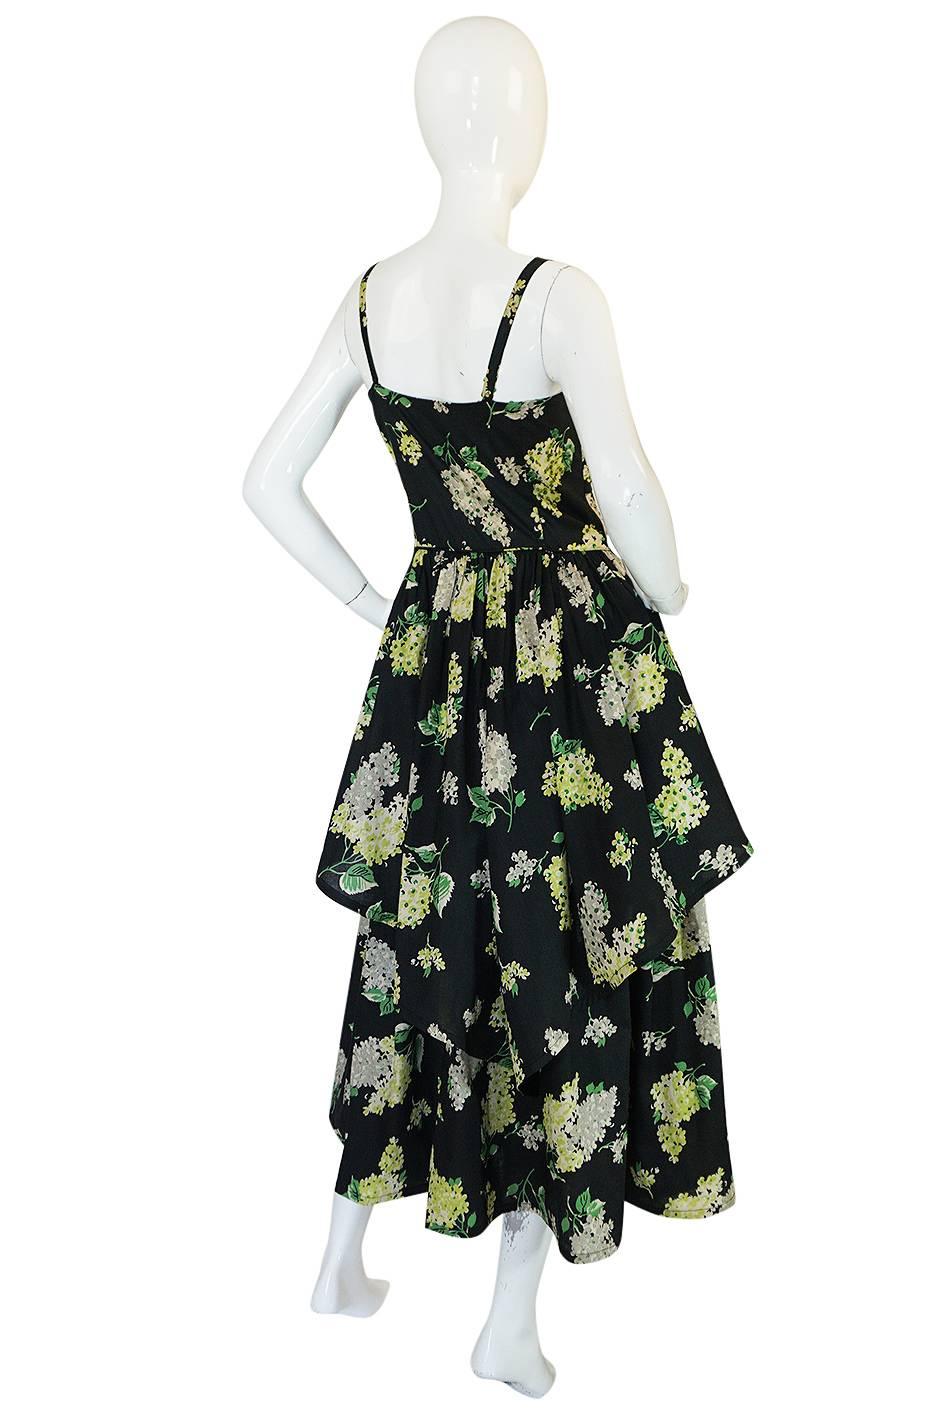 This stunning dress that dates to the late forties, early 1950s combines a beautiful print and color combination with sequins and a pretty feminine feel. The entire dress is stunning and made of a beautiful black cotton voile with a pretty floral